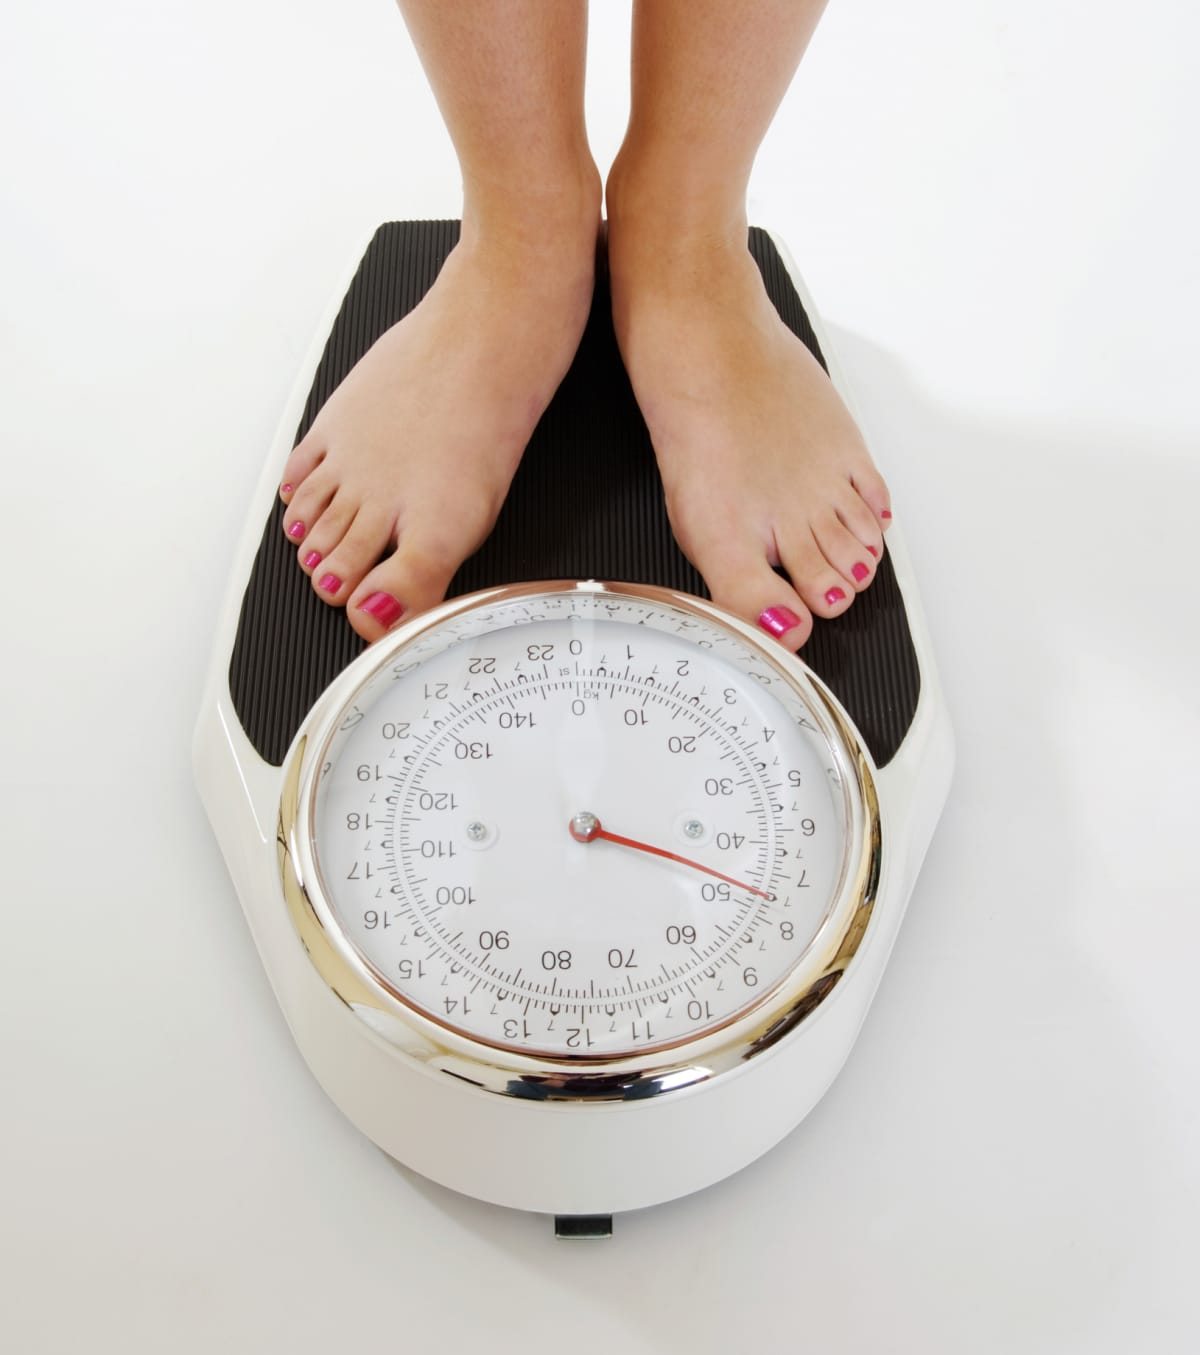 Feet on scales and showing the weight dial to indicate healthy lifestyle